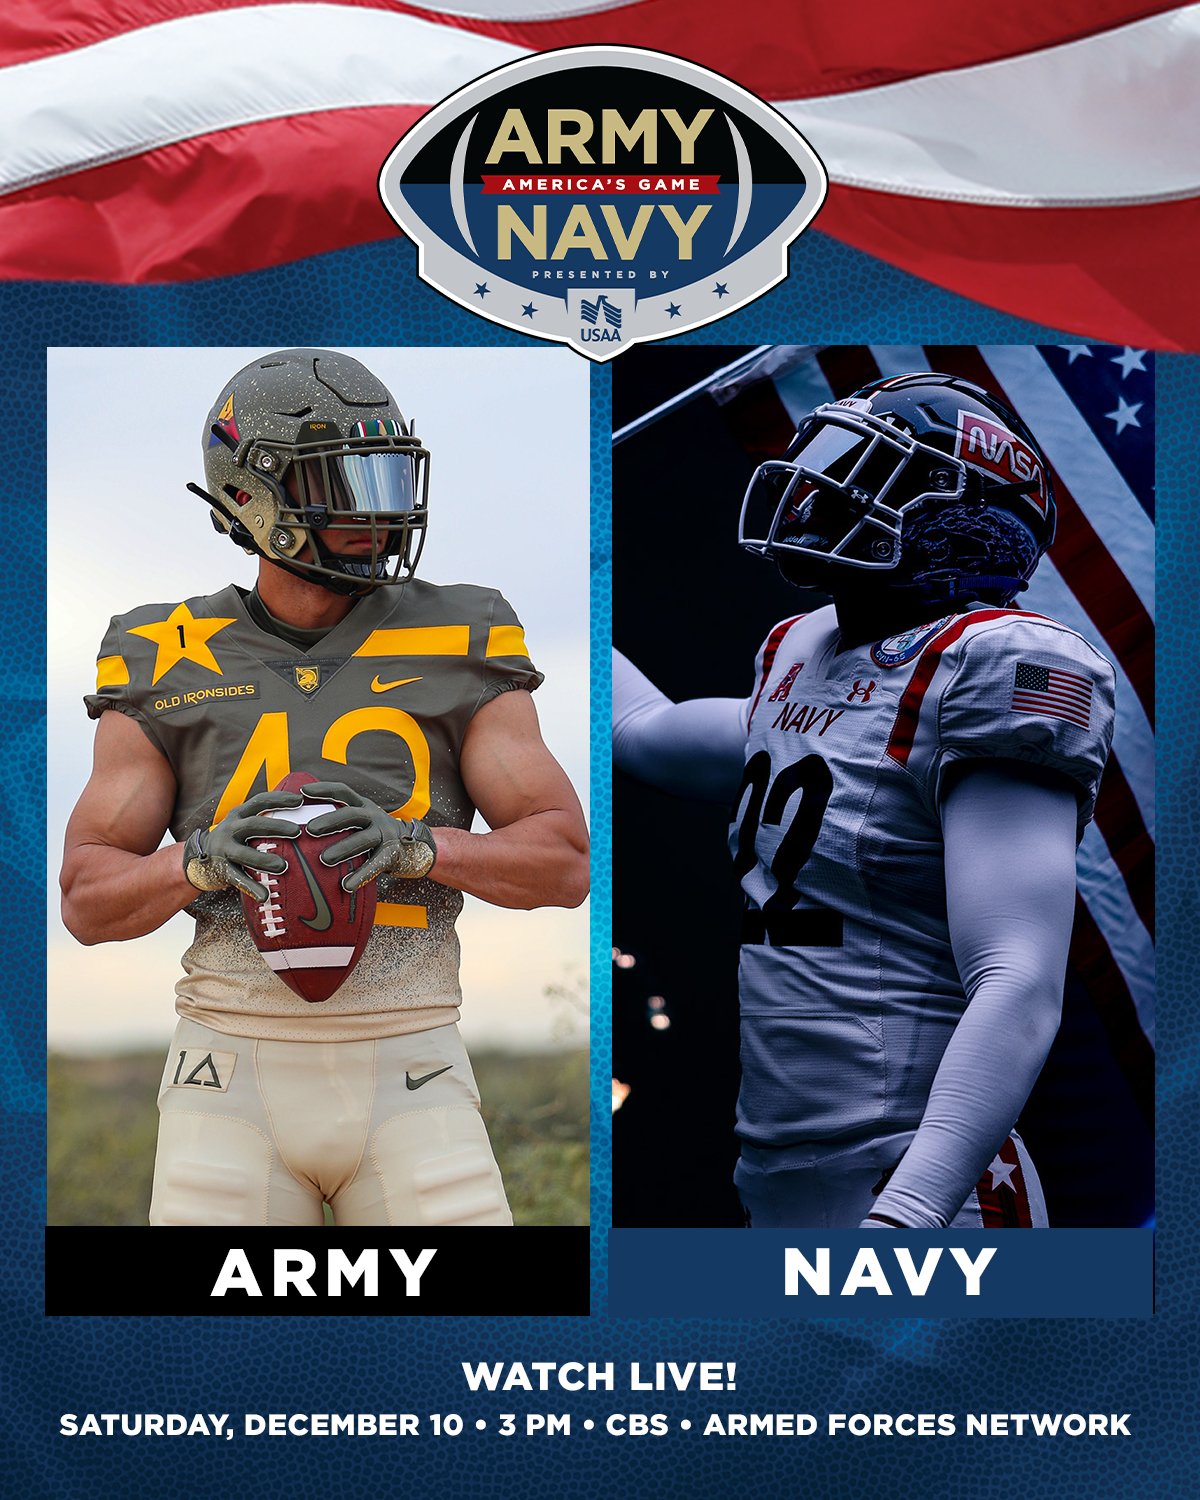 Army-Navy Game Watch Party Business Executives For National